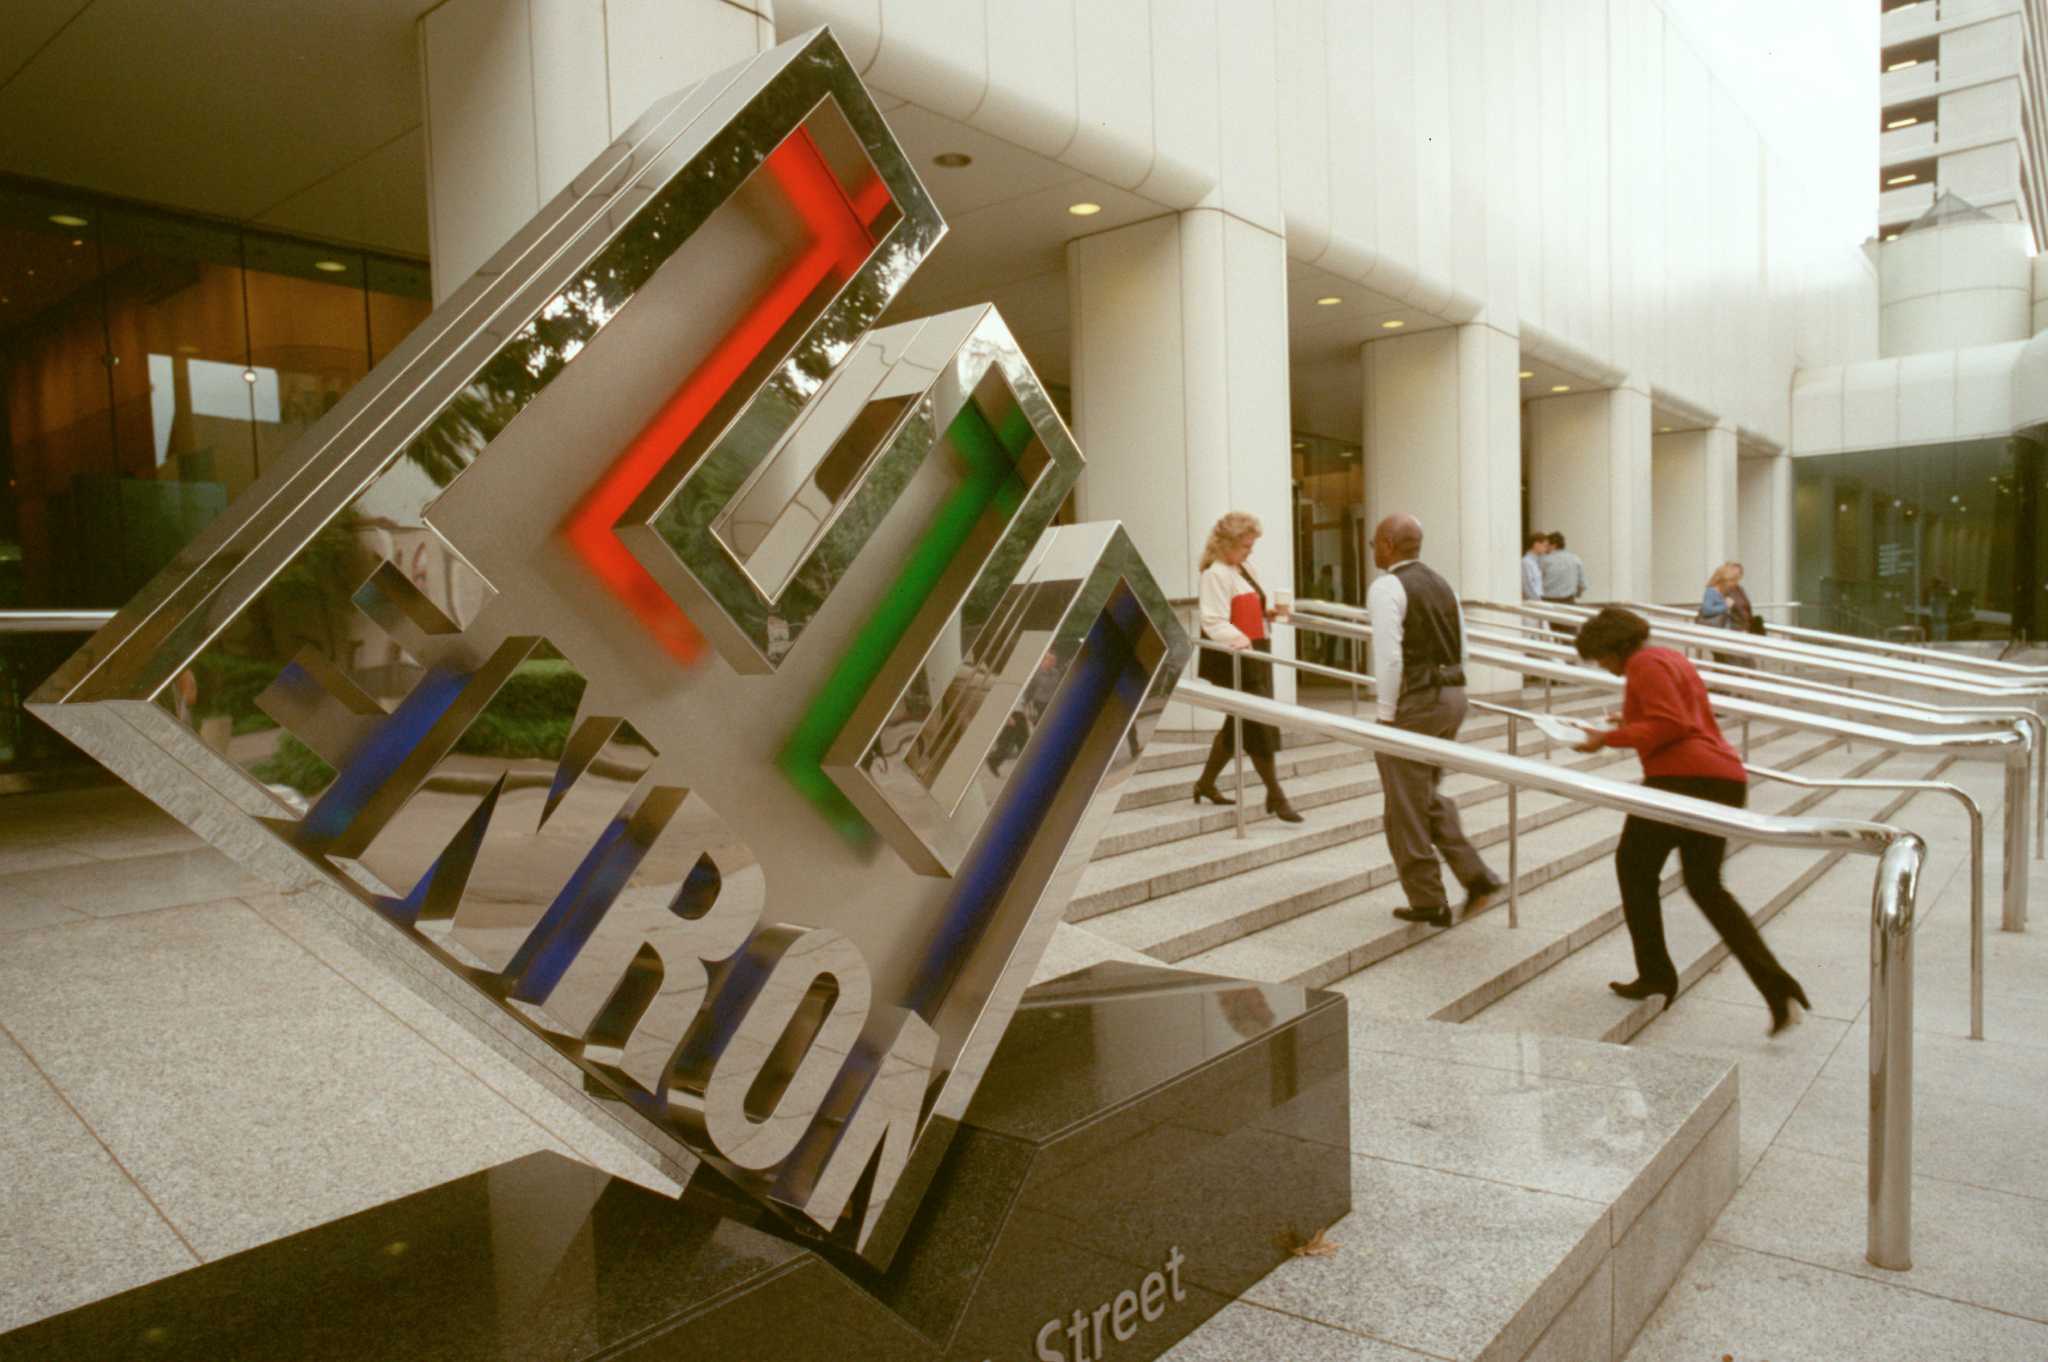 Looking back at the rise and fall of Enron - Houston Chronicle2048 x 1362